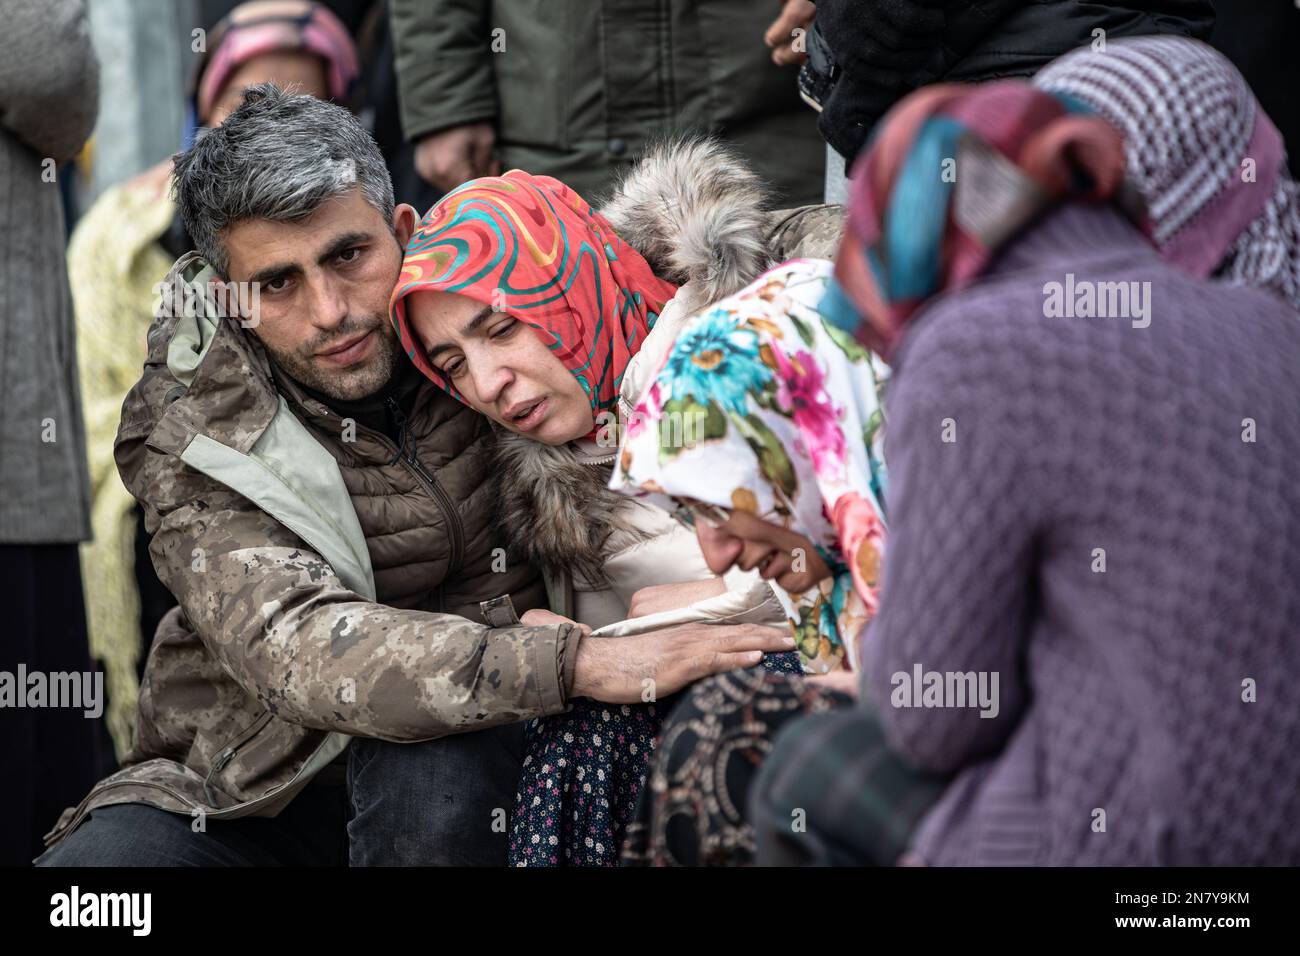 Adiyaman, Turkey. 10th Feb, 2023. People mourn the death of their relatives following an earthquake. Monday morning, a strong 7.7 magnitude, centered in the Pazarcik district, jolted Kahramanmaras and strongly shook several provinces, including Gaziantep, Sanliurfa, Diyarbakir, Adana, Adiyaman, Malatya, Osmaniye, Hatay, and Kilis. Later, at 13.24 p.m. (1024GMT), a 7.6 magnitude quake centered in Kahramanmaras' Elbistan district struck the region. Turkiye declared 7 days of national mourning after deadly earthquakes in southern provinces. Credit: SOPA Images Limited/Alamy Live News Stock Photo